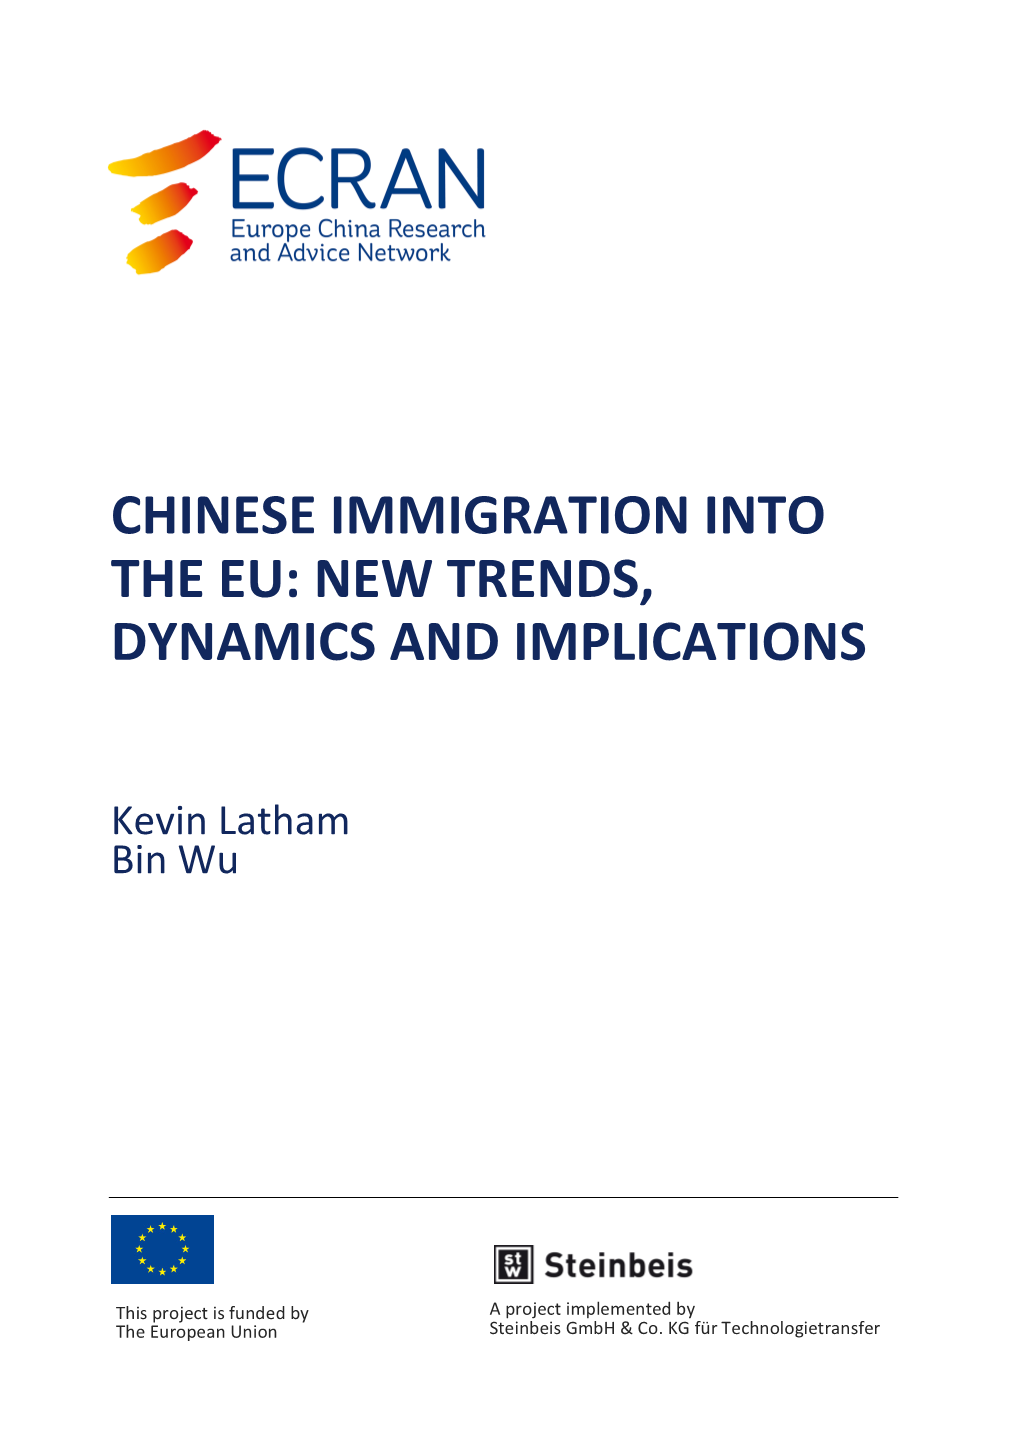 Chinese Immigration Into the Eu: New Trends, Dynamics and Implications